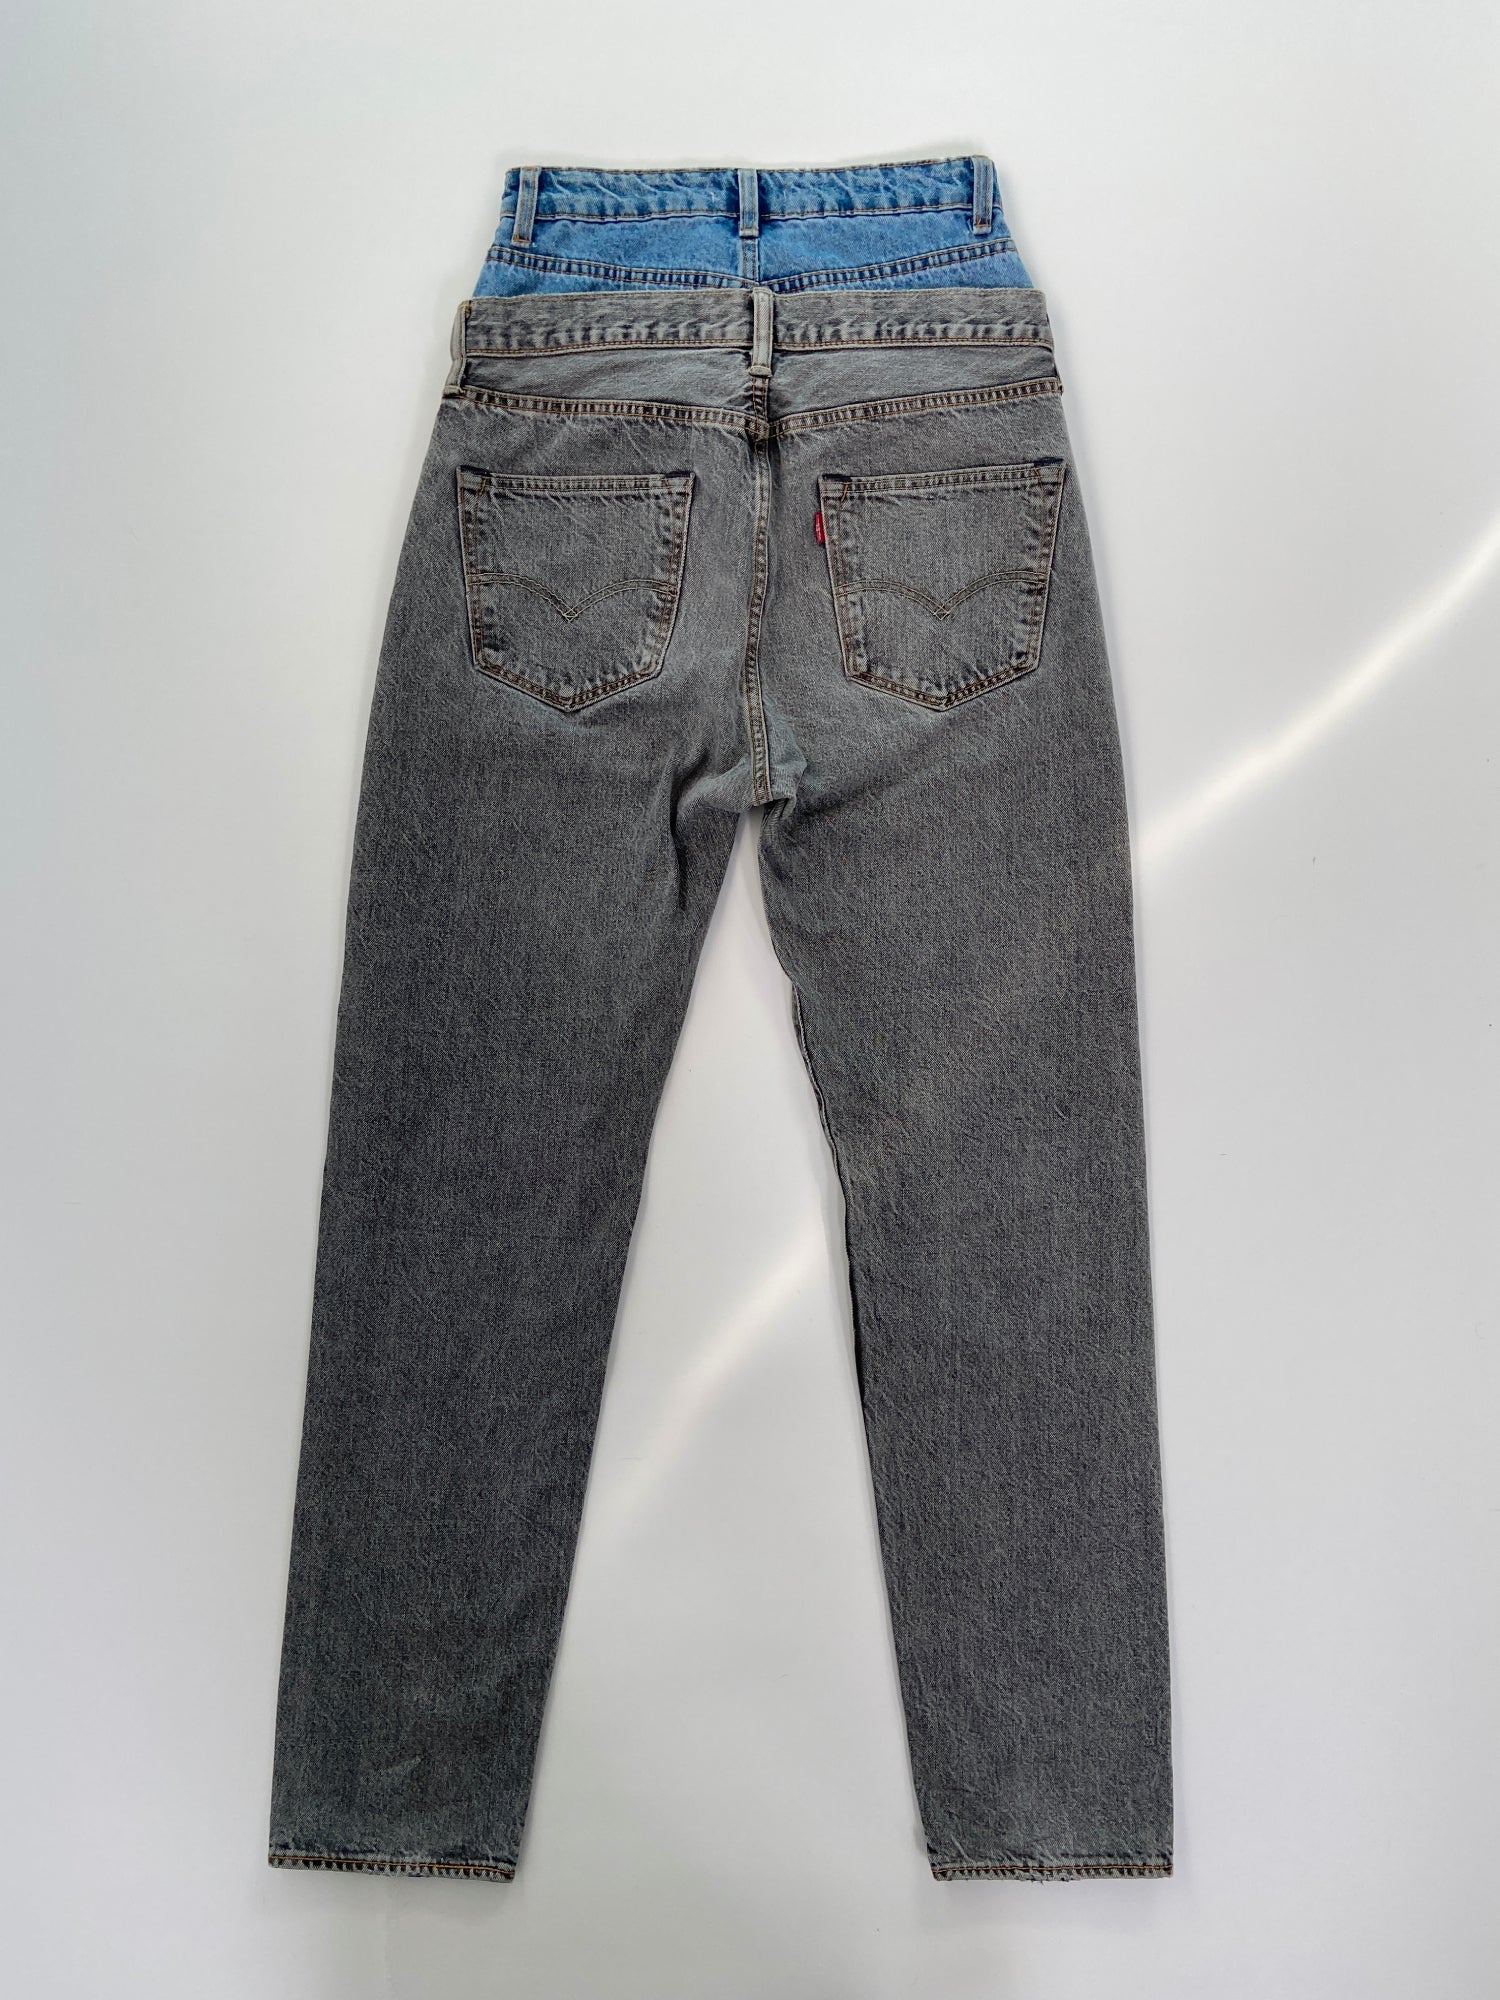 2IN1 JEANS - SIZE S-M